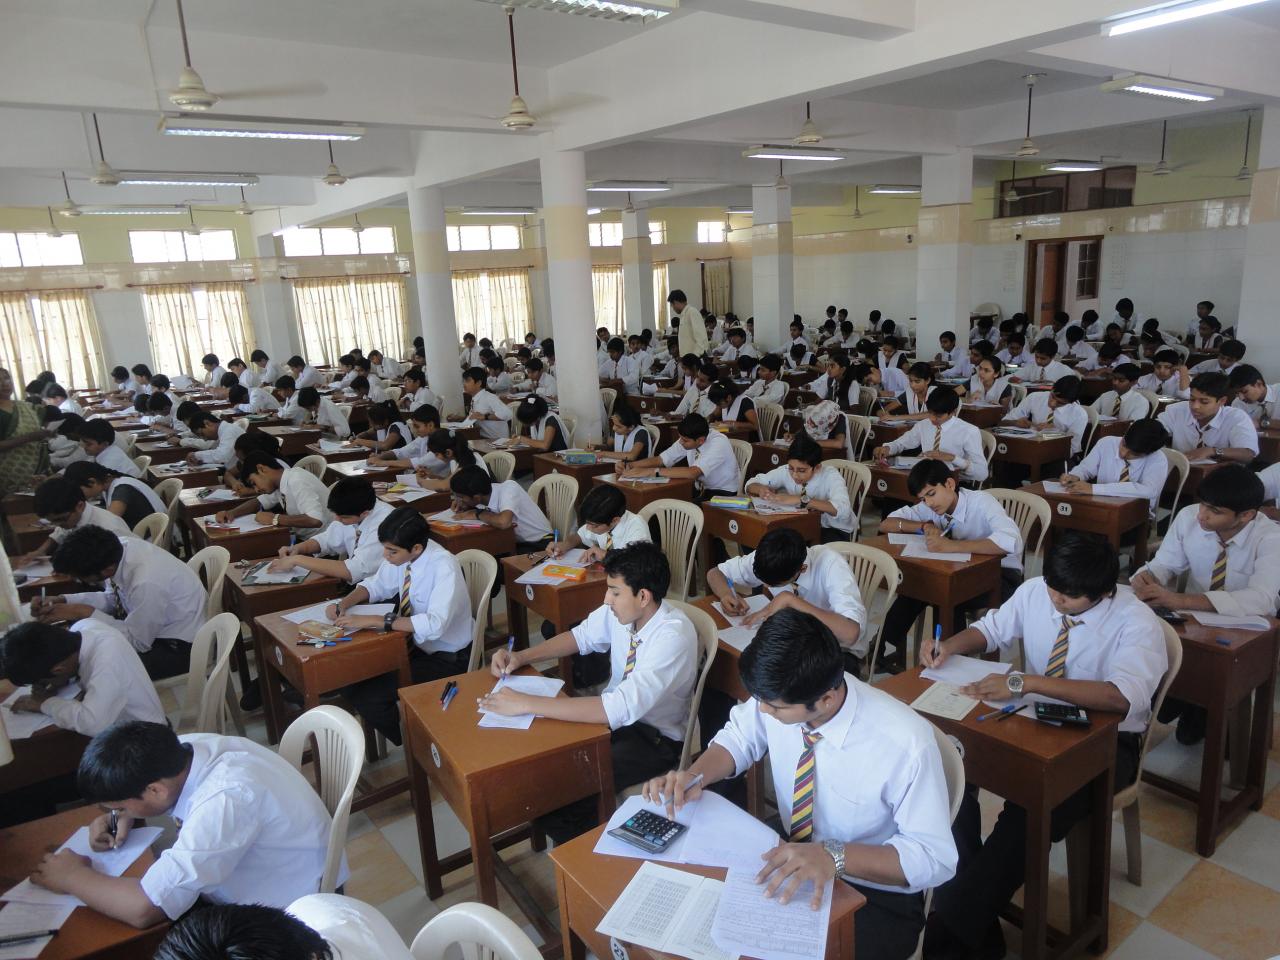 Battling between board and competitive exams? Manage